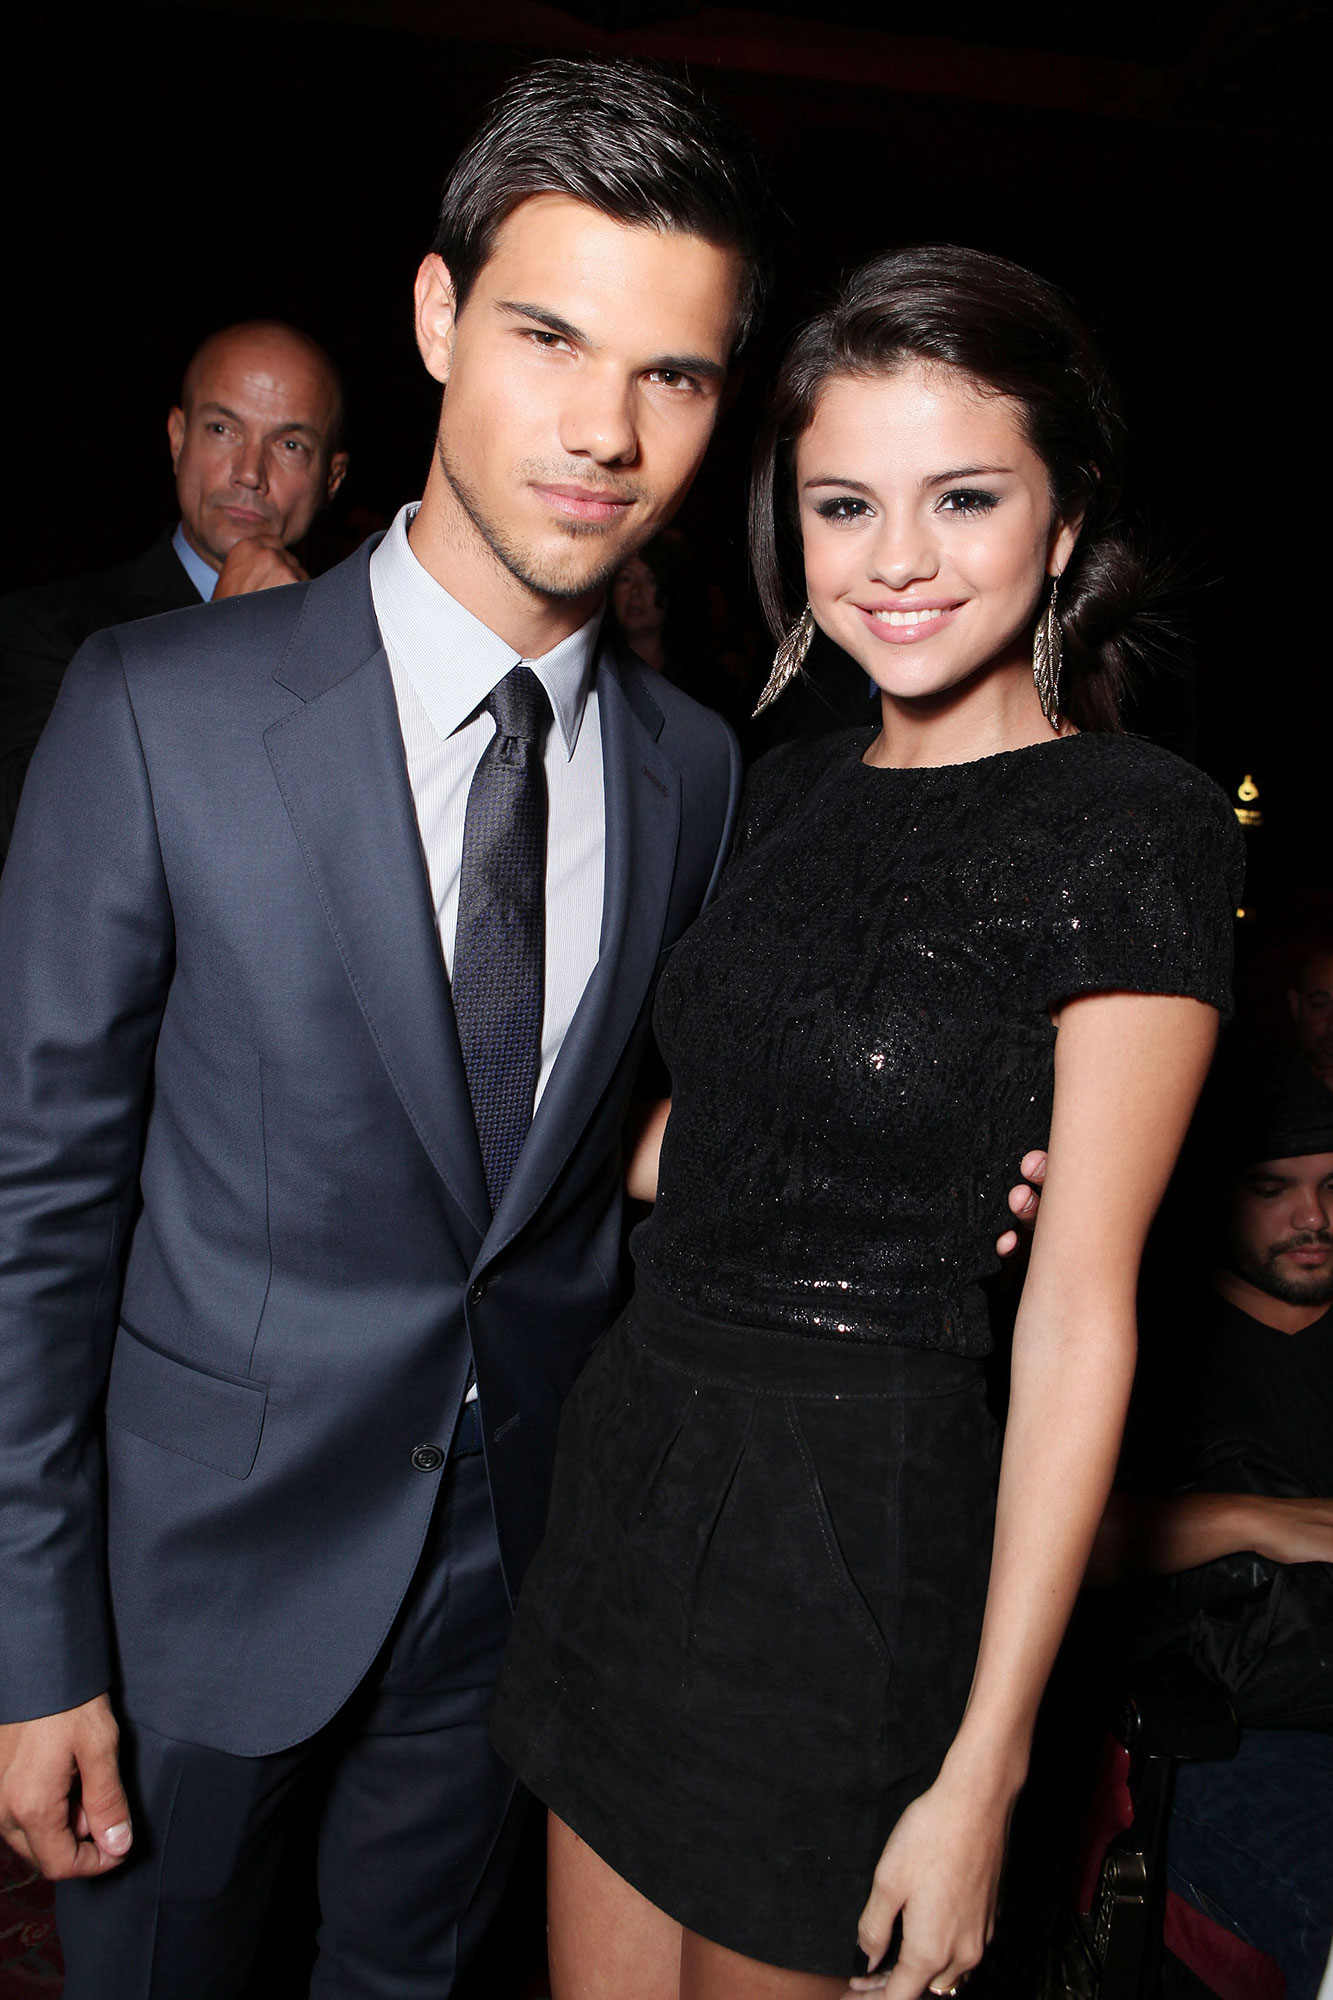 Lautner dating taylor Who Is